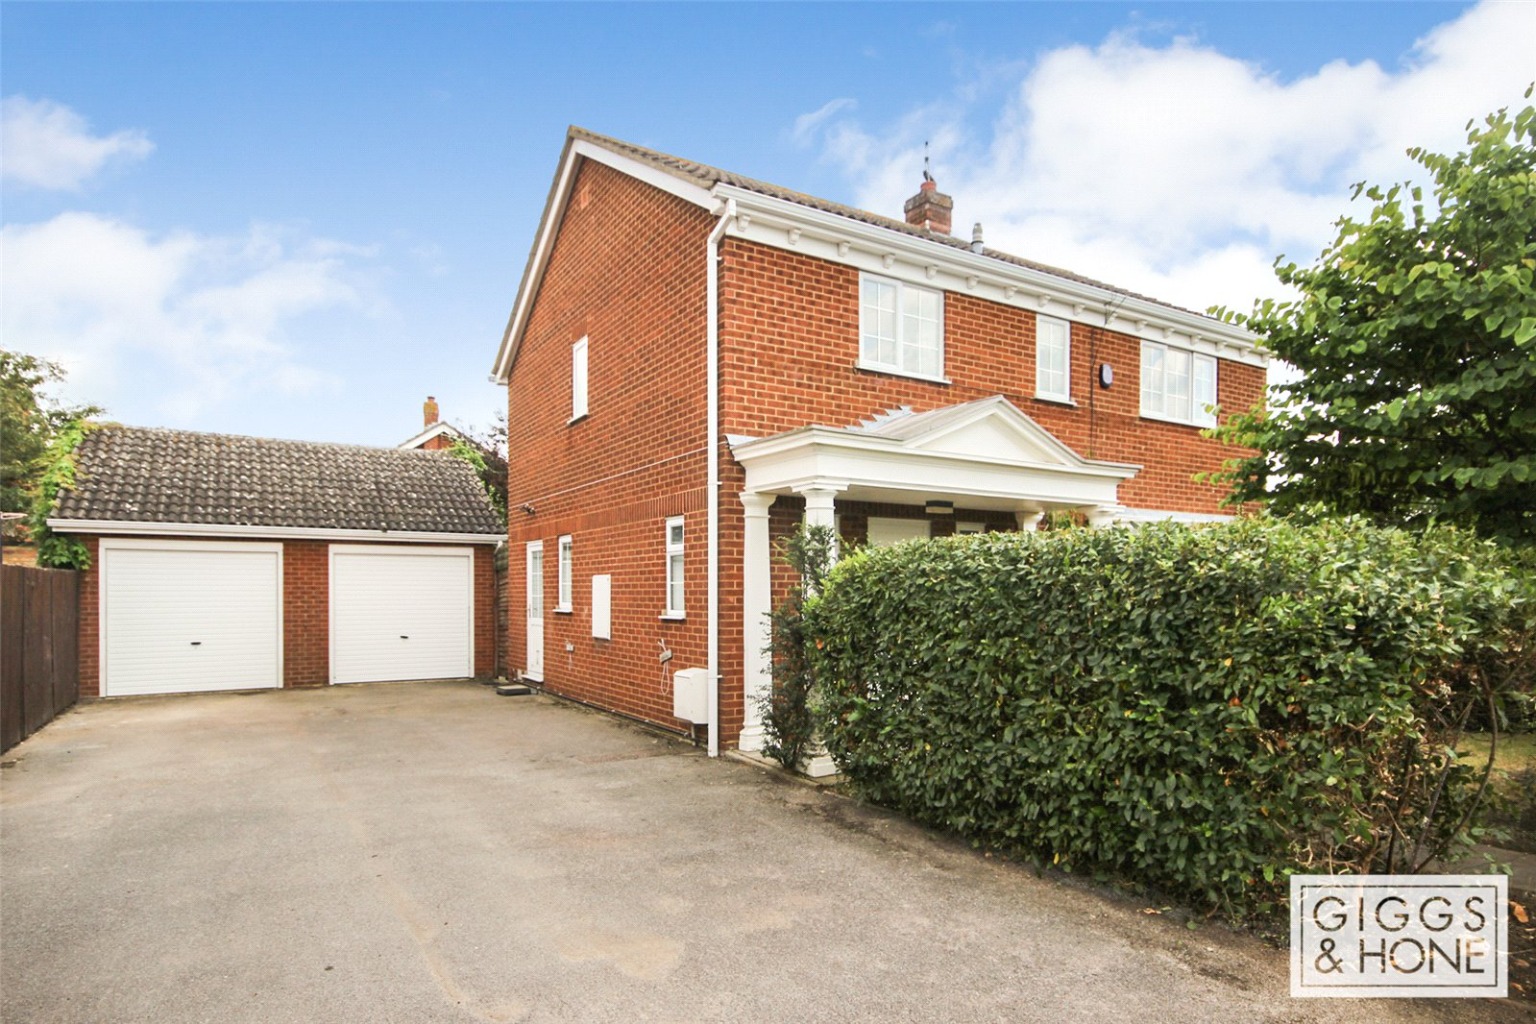 This superb four bedroom detached house is located on Willow Springs tucked away at the end of a quiet Cu De Sac in the popular village of Cranfield, being conveniently located within walking distance to lots of local amenities as well as excellent schools.